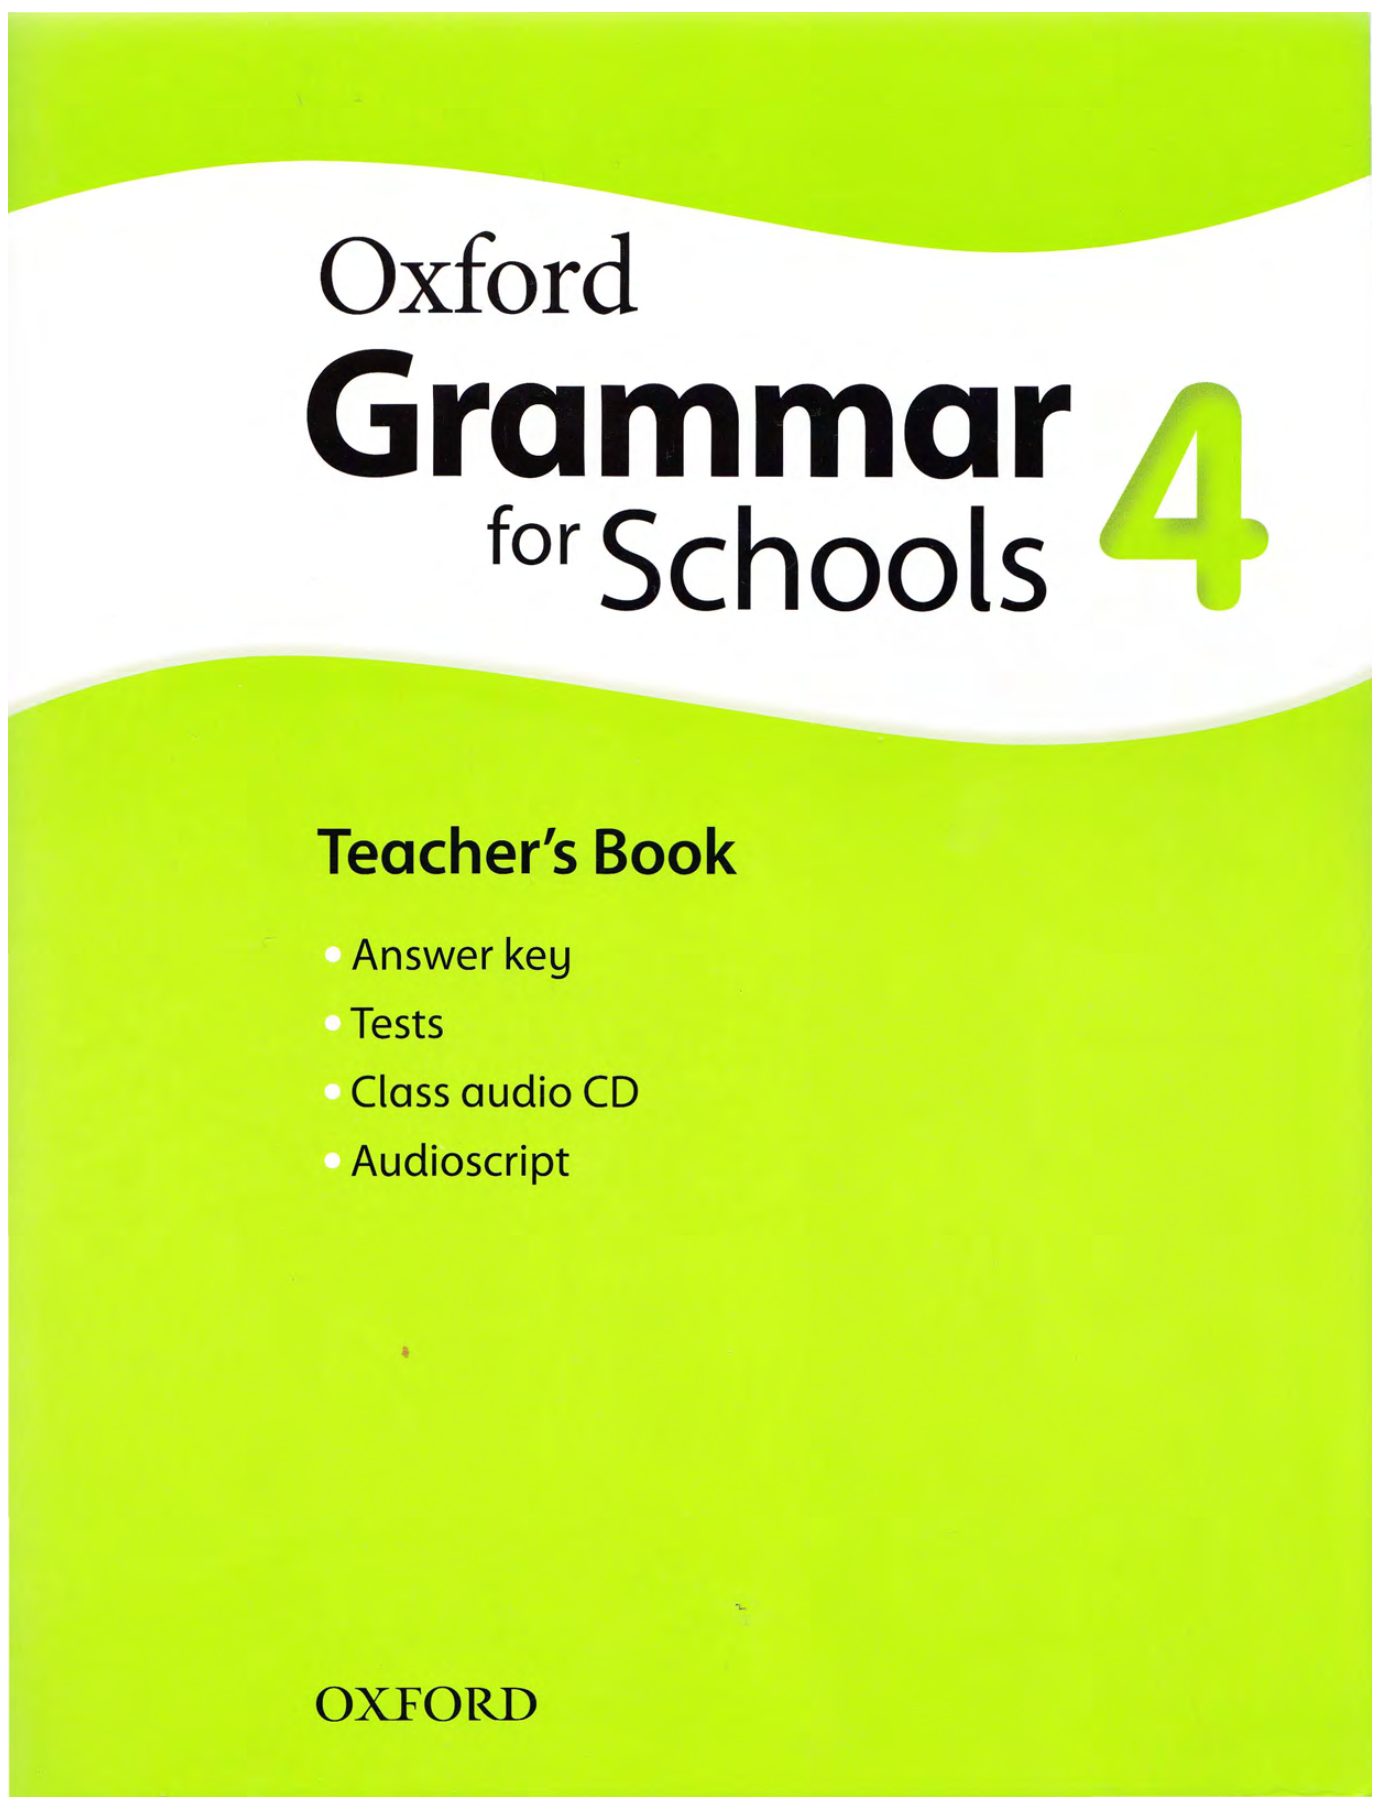 Rich Results on Google's SERP when searching for 'Oxford Grammar for Schools Teachers Book 4'